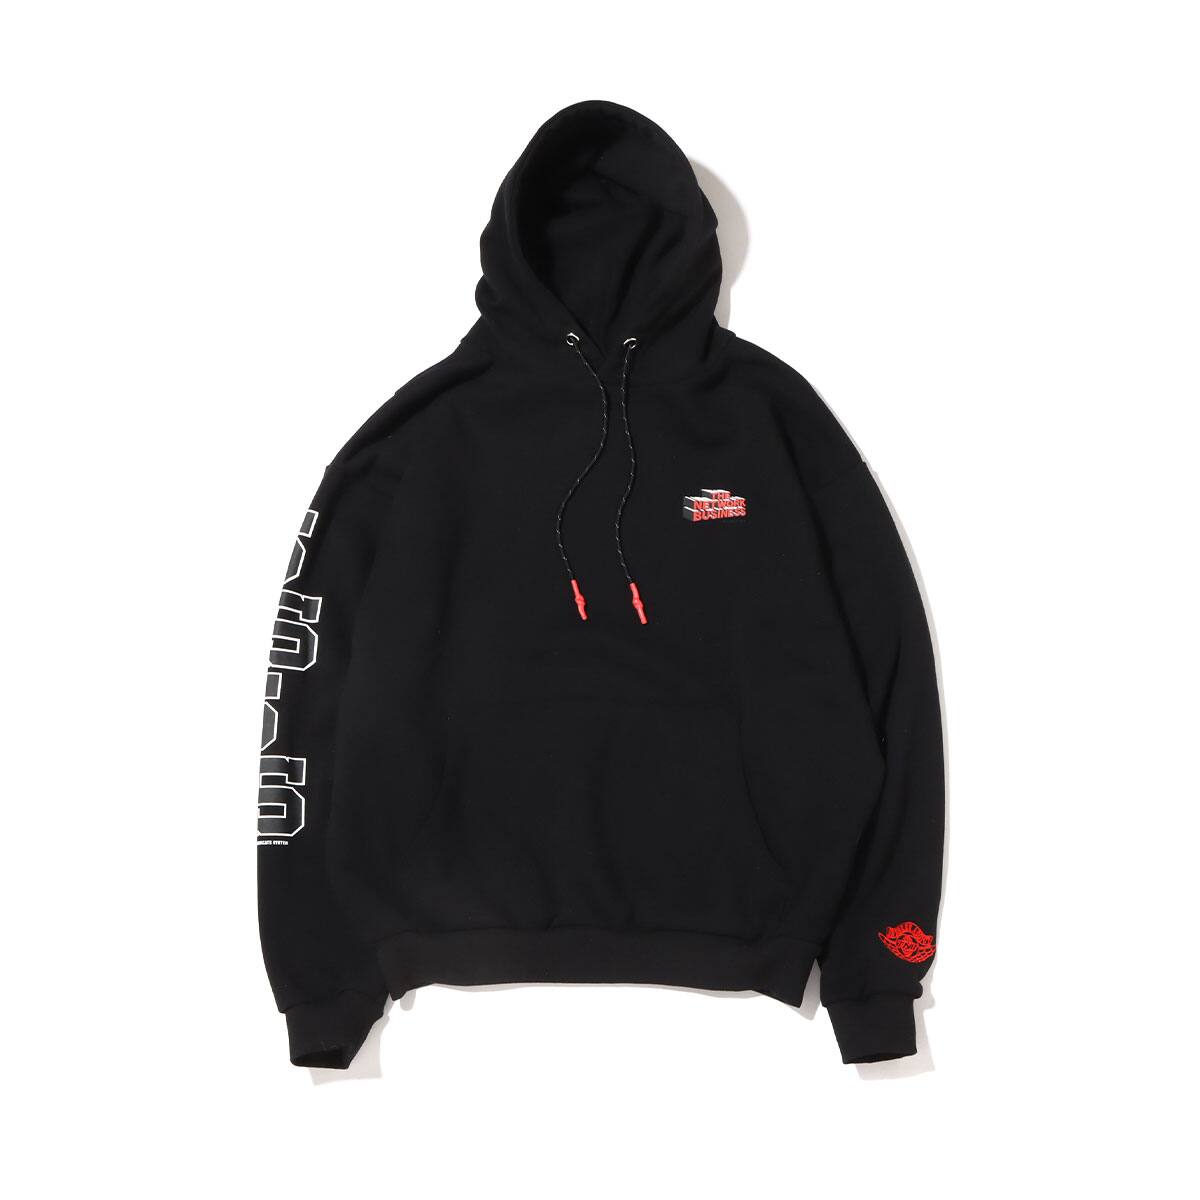 THE NETWORK BUSINESS PULL OVER HOODIE BRED BLACK 21HO-I_photo_large